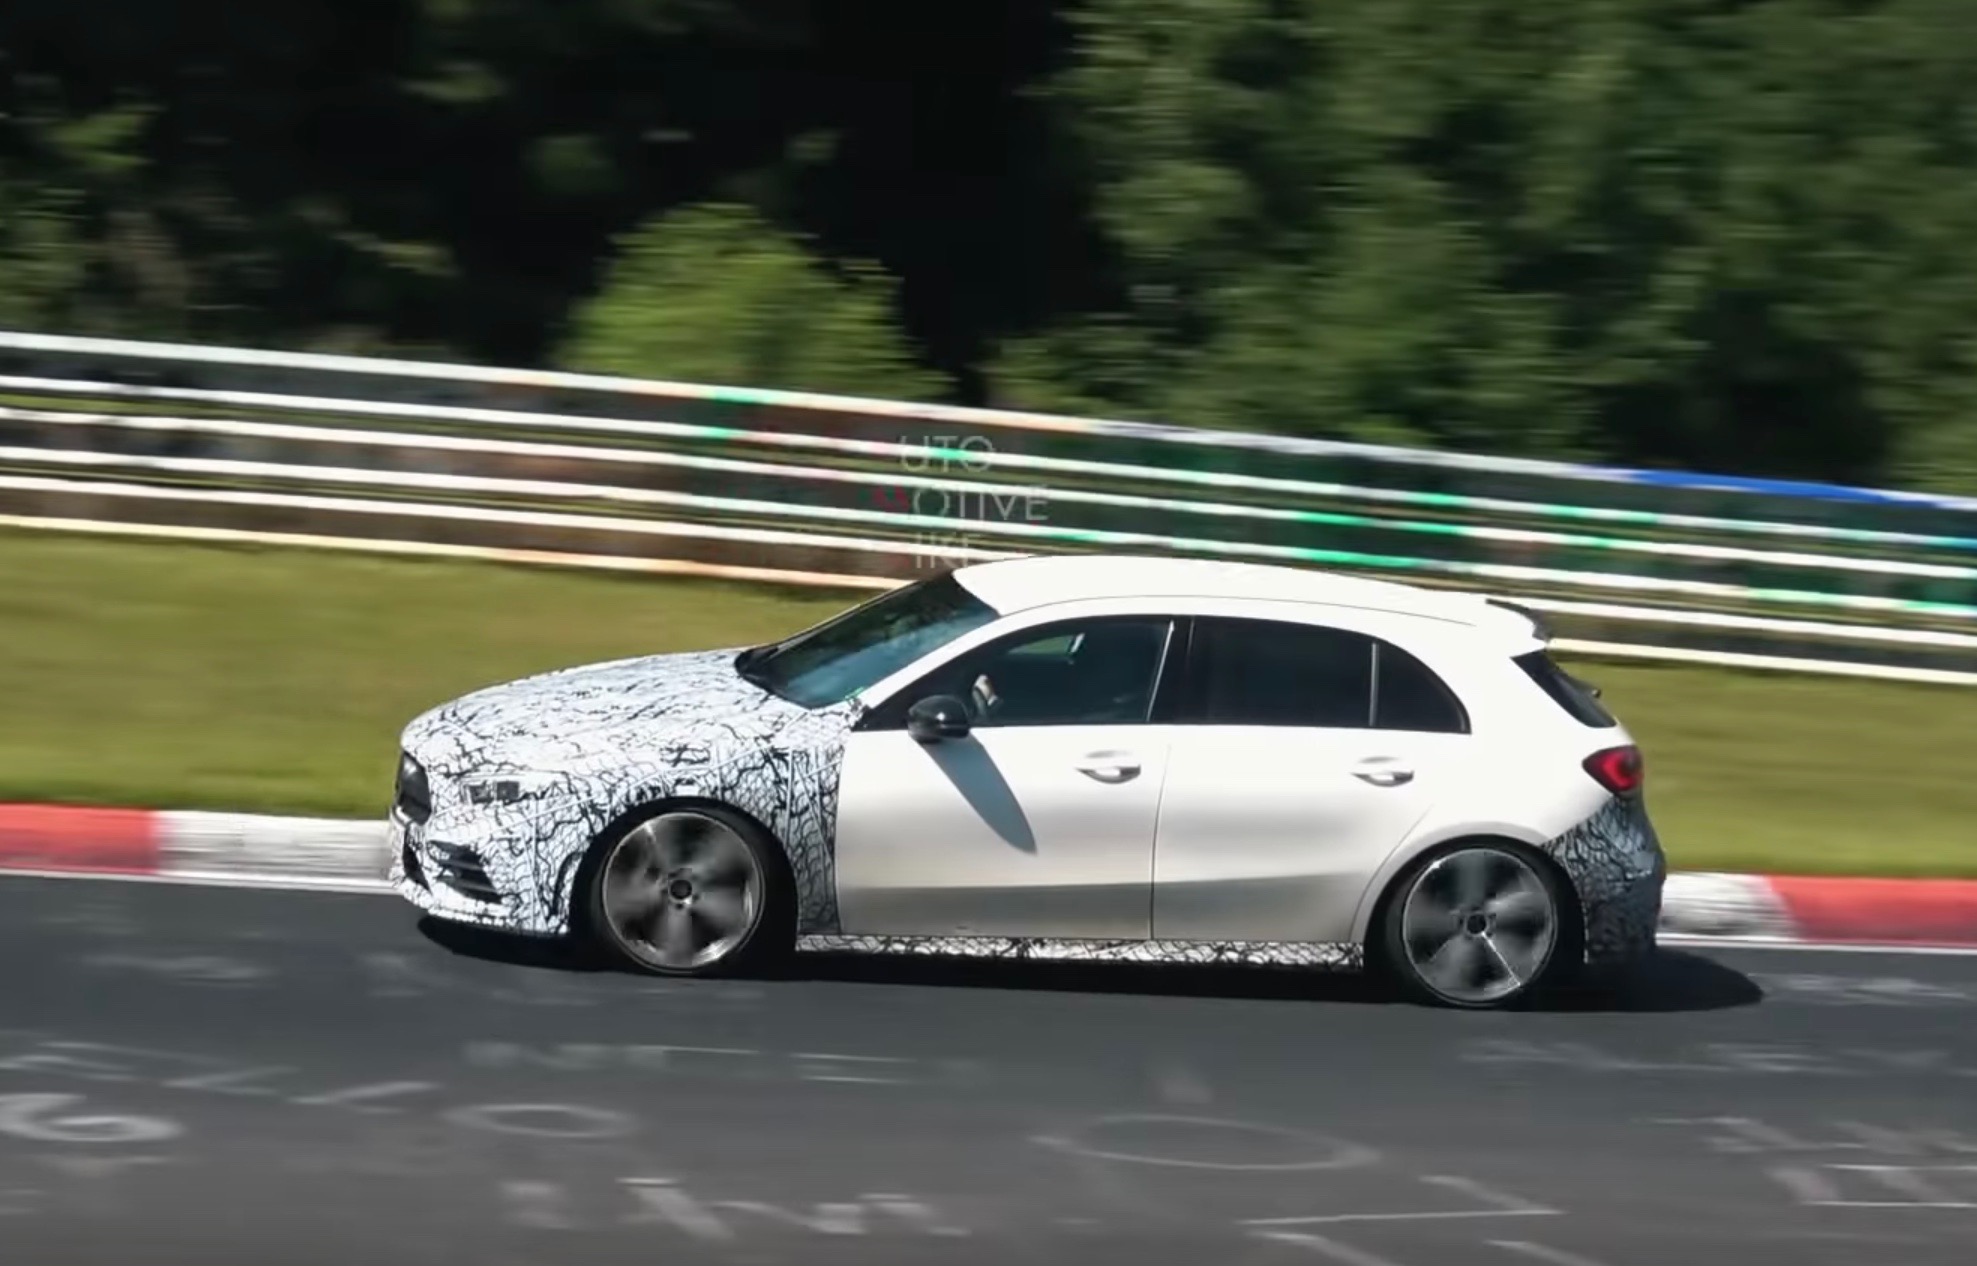 2019 Mercedes-AMG A 35 spotted testing at Nurburgring (video)